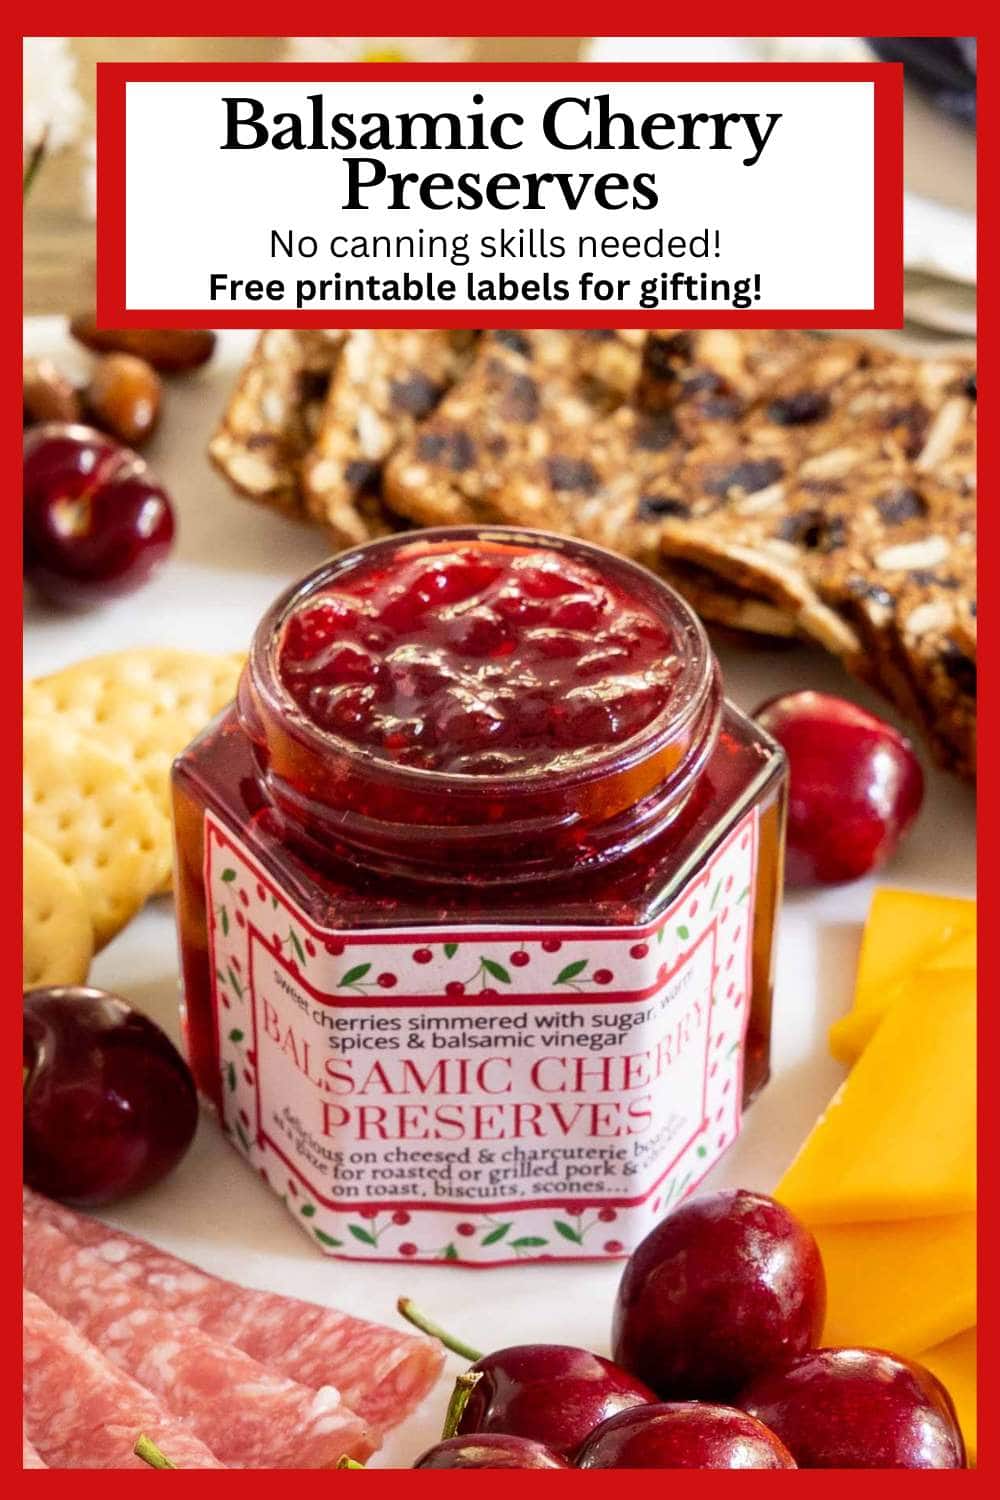 Balsamic Sweet Cherry Preserves - No Canning Skills Needed! (with free printable labels for gifting)